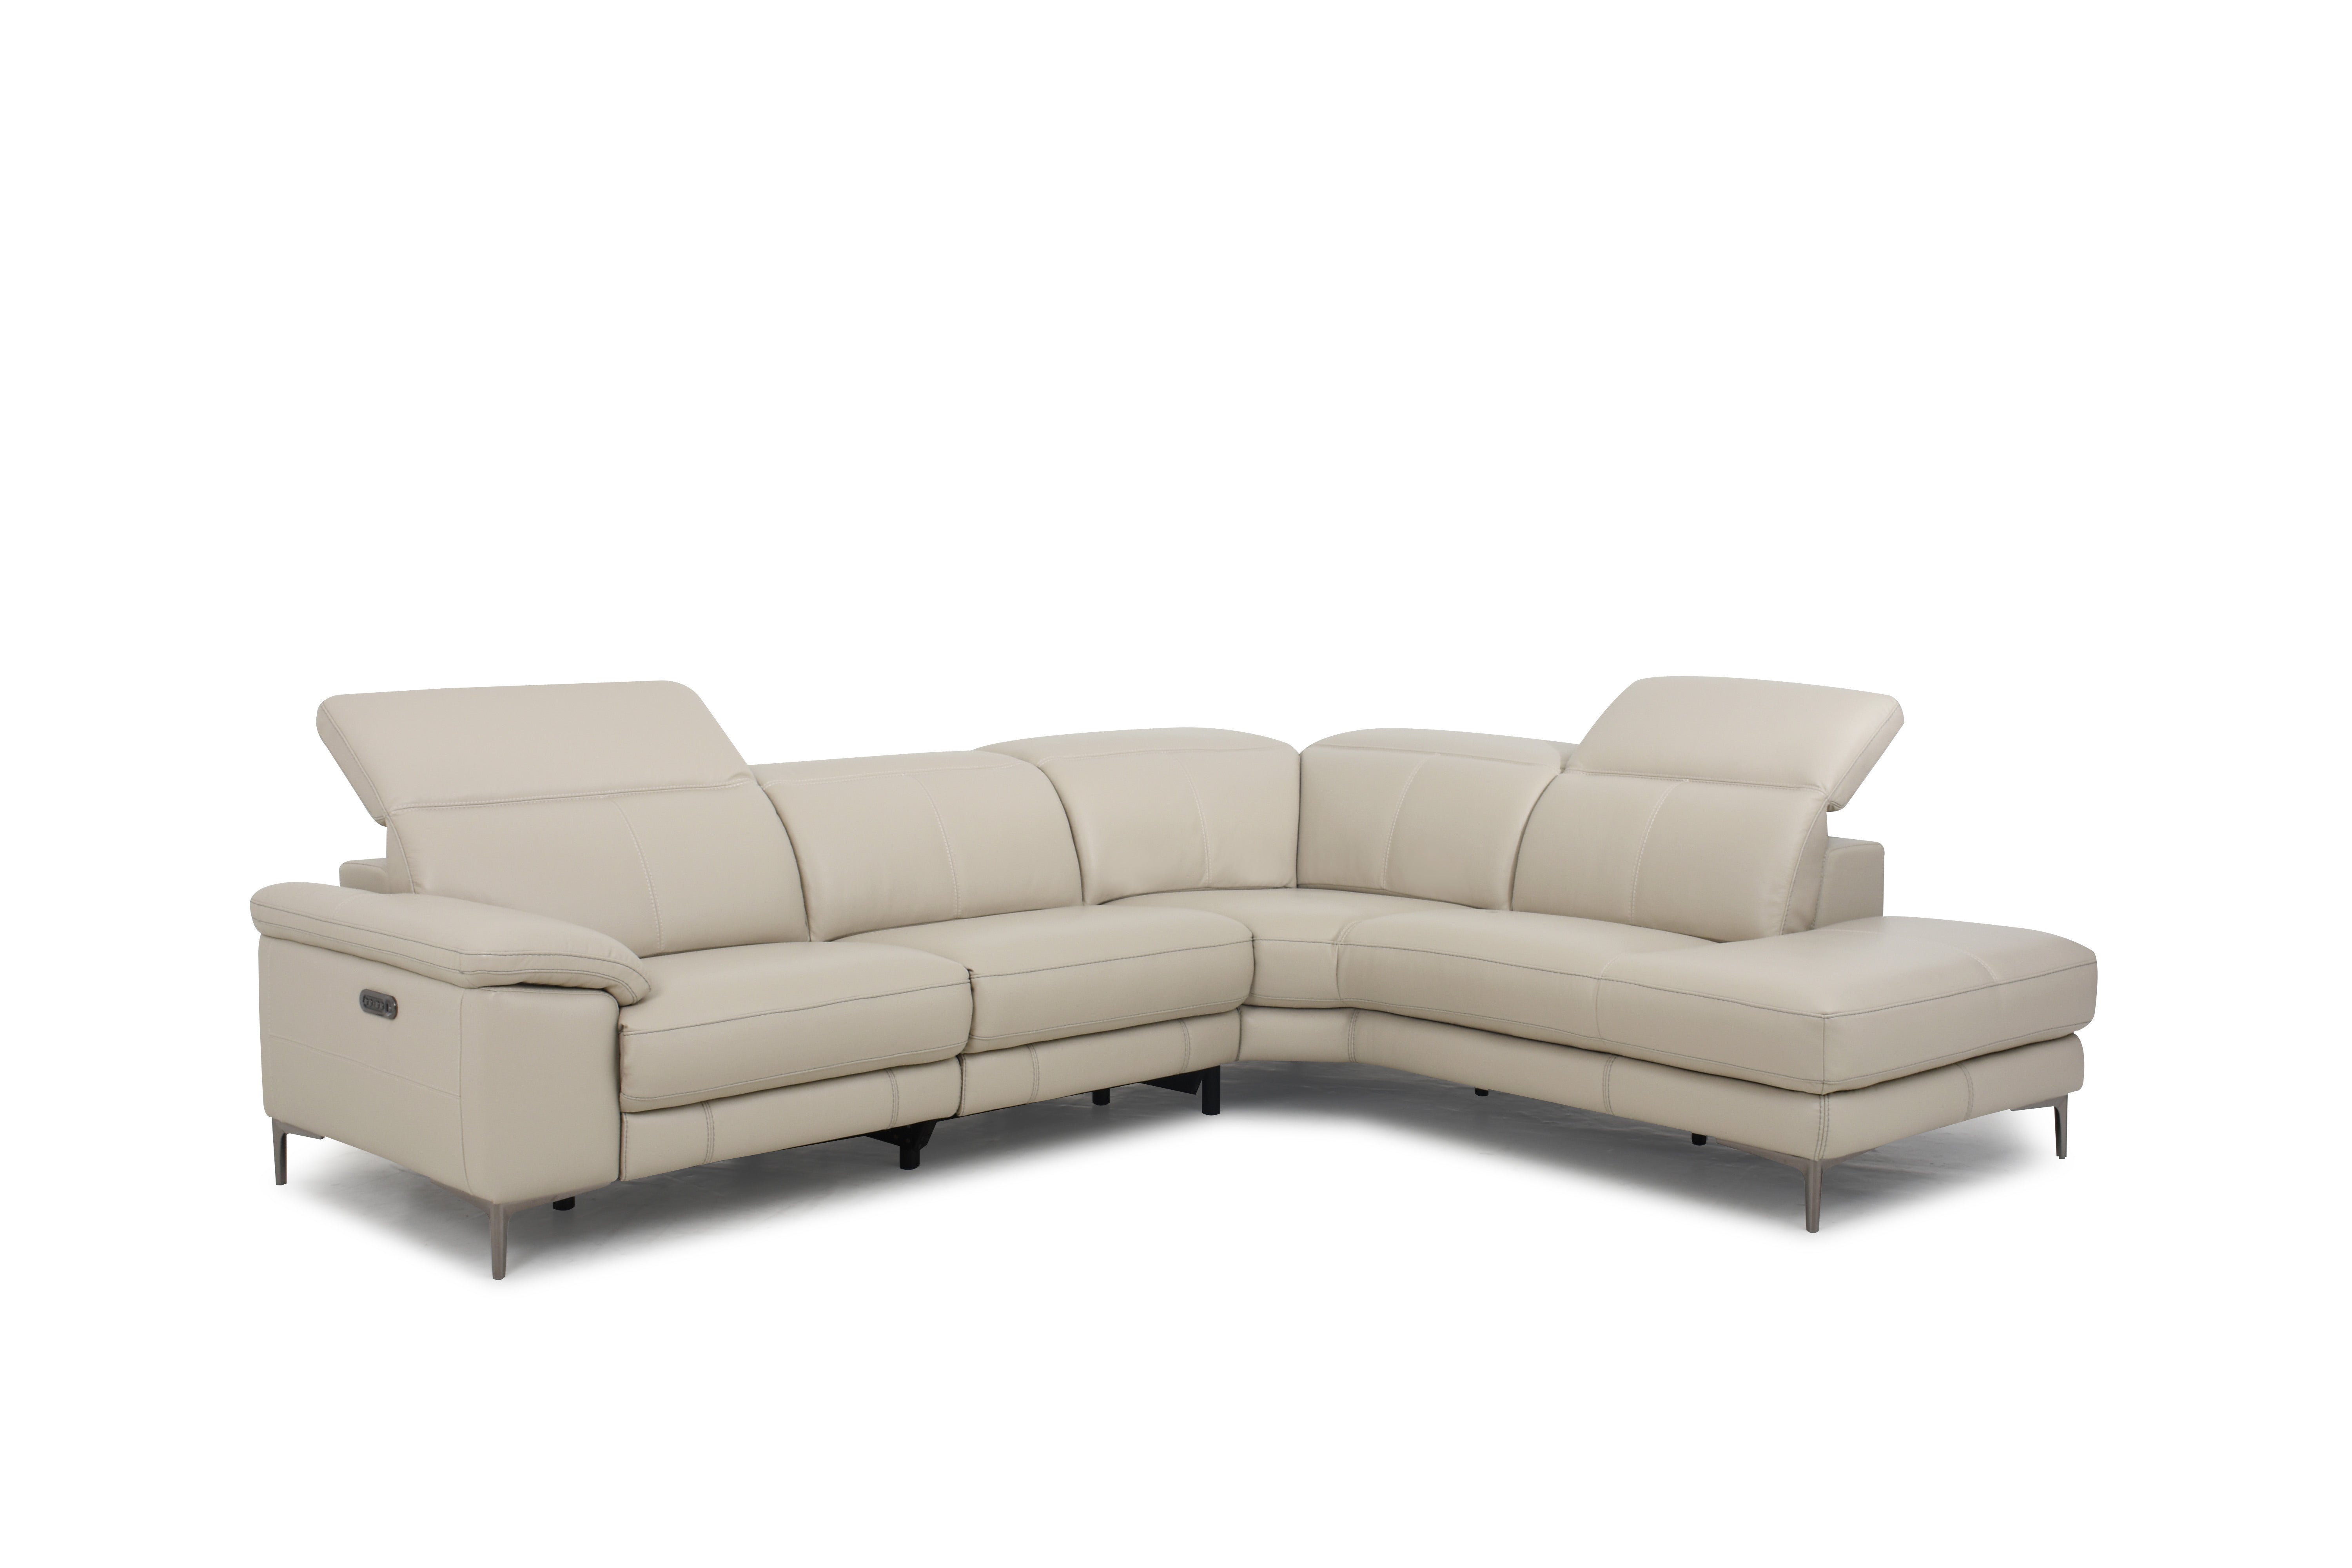 MU-11831 - Sectional Right Chaise w/ 2 Power Recliners-USB Port - 100% Leather Silver Grey